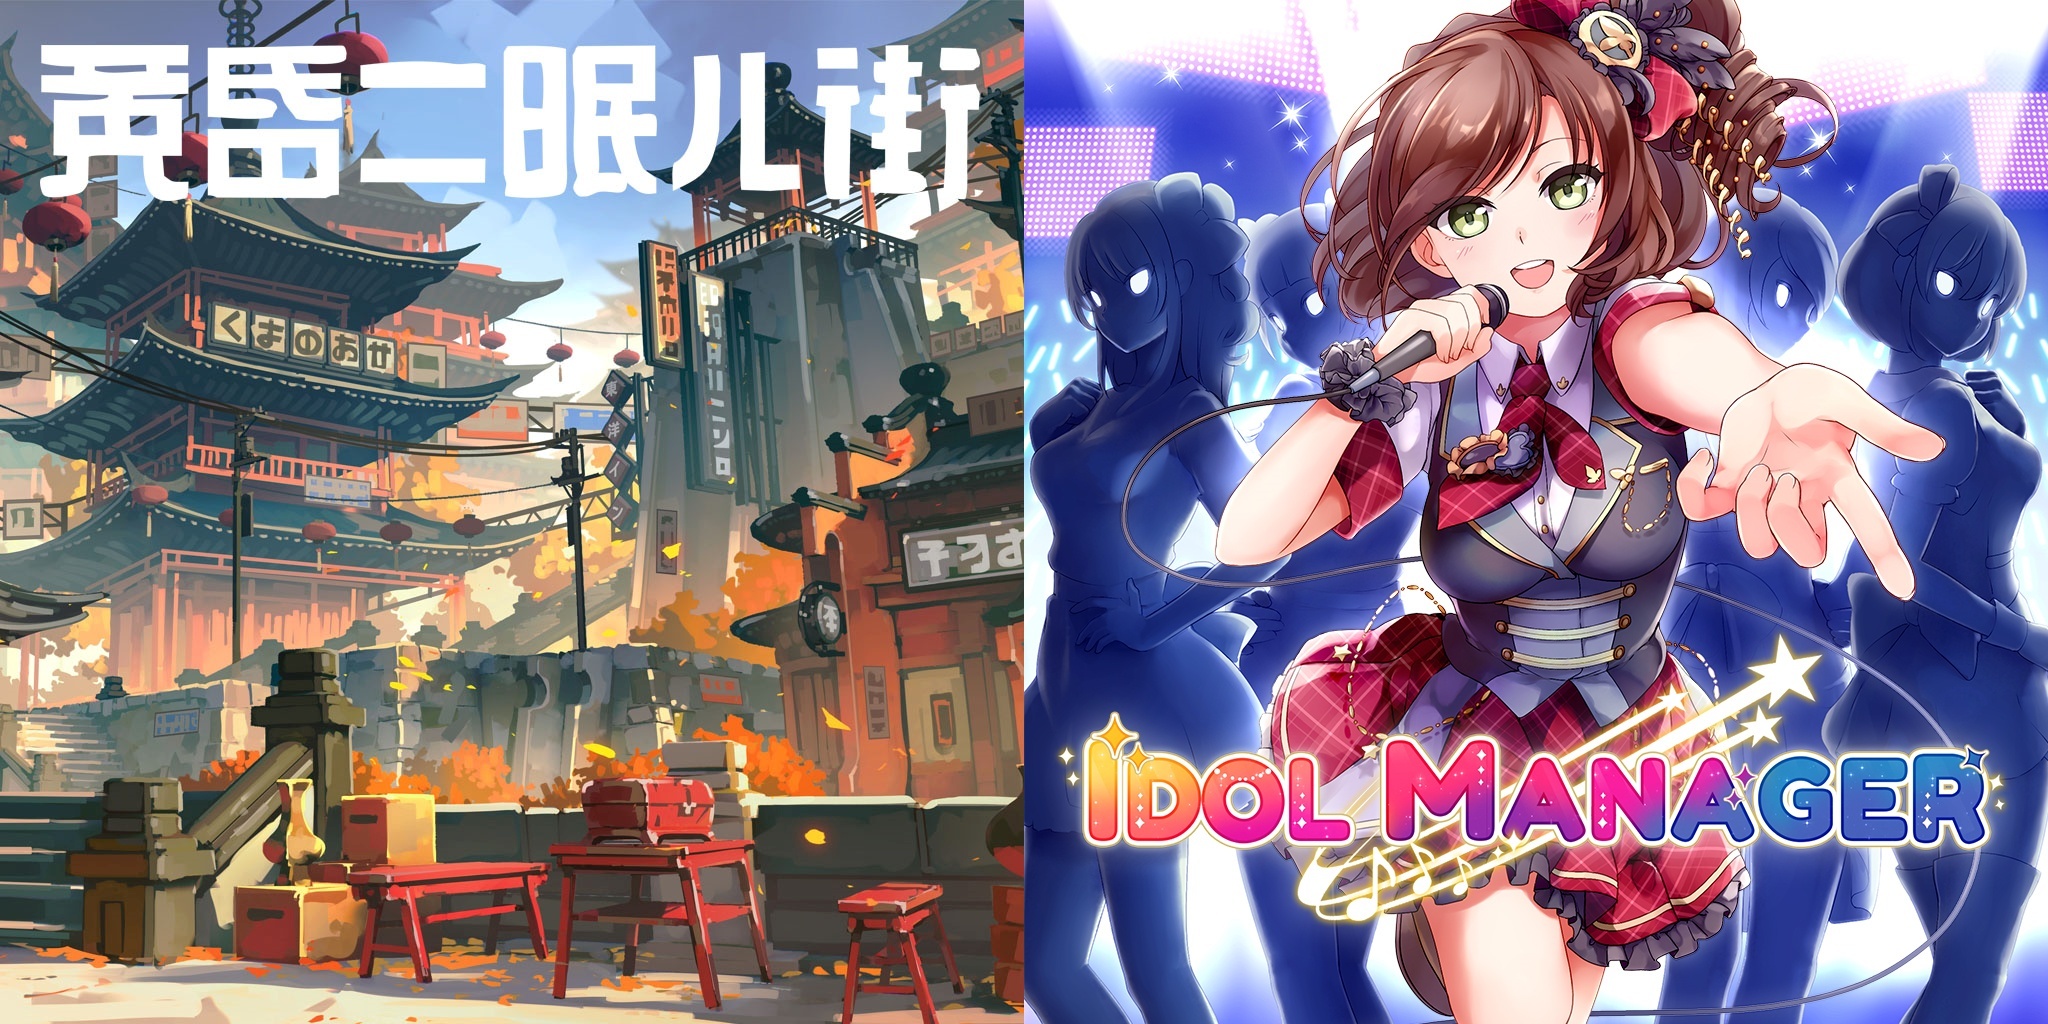 Playism Tasomachi And Idol Manager Will Be Published By Playism